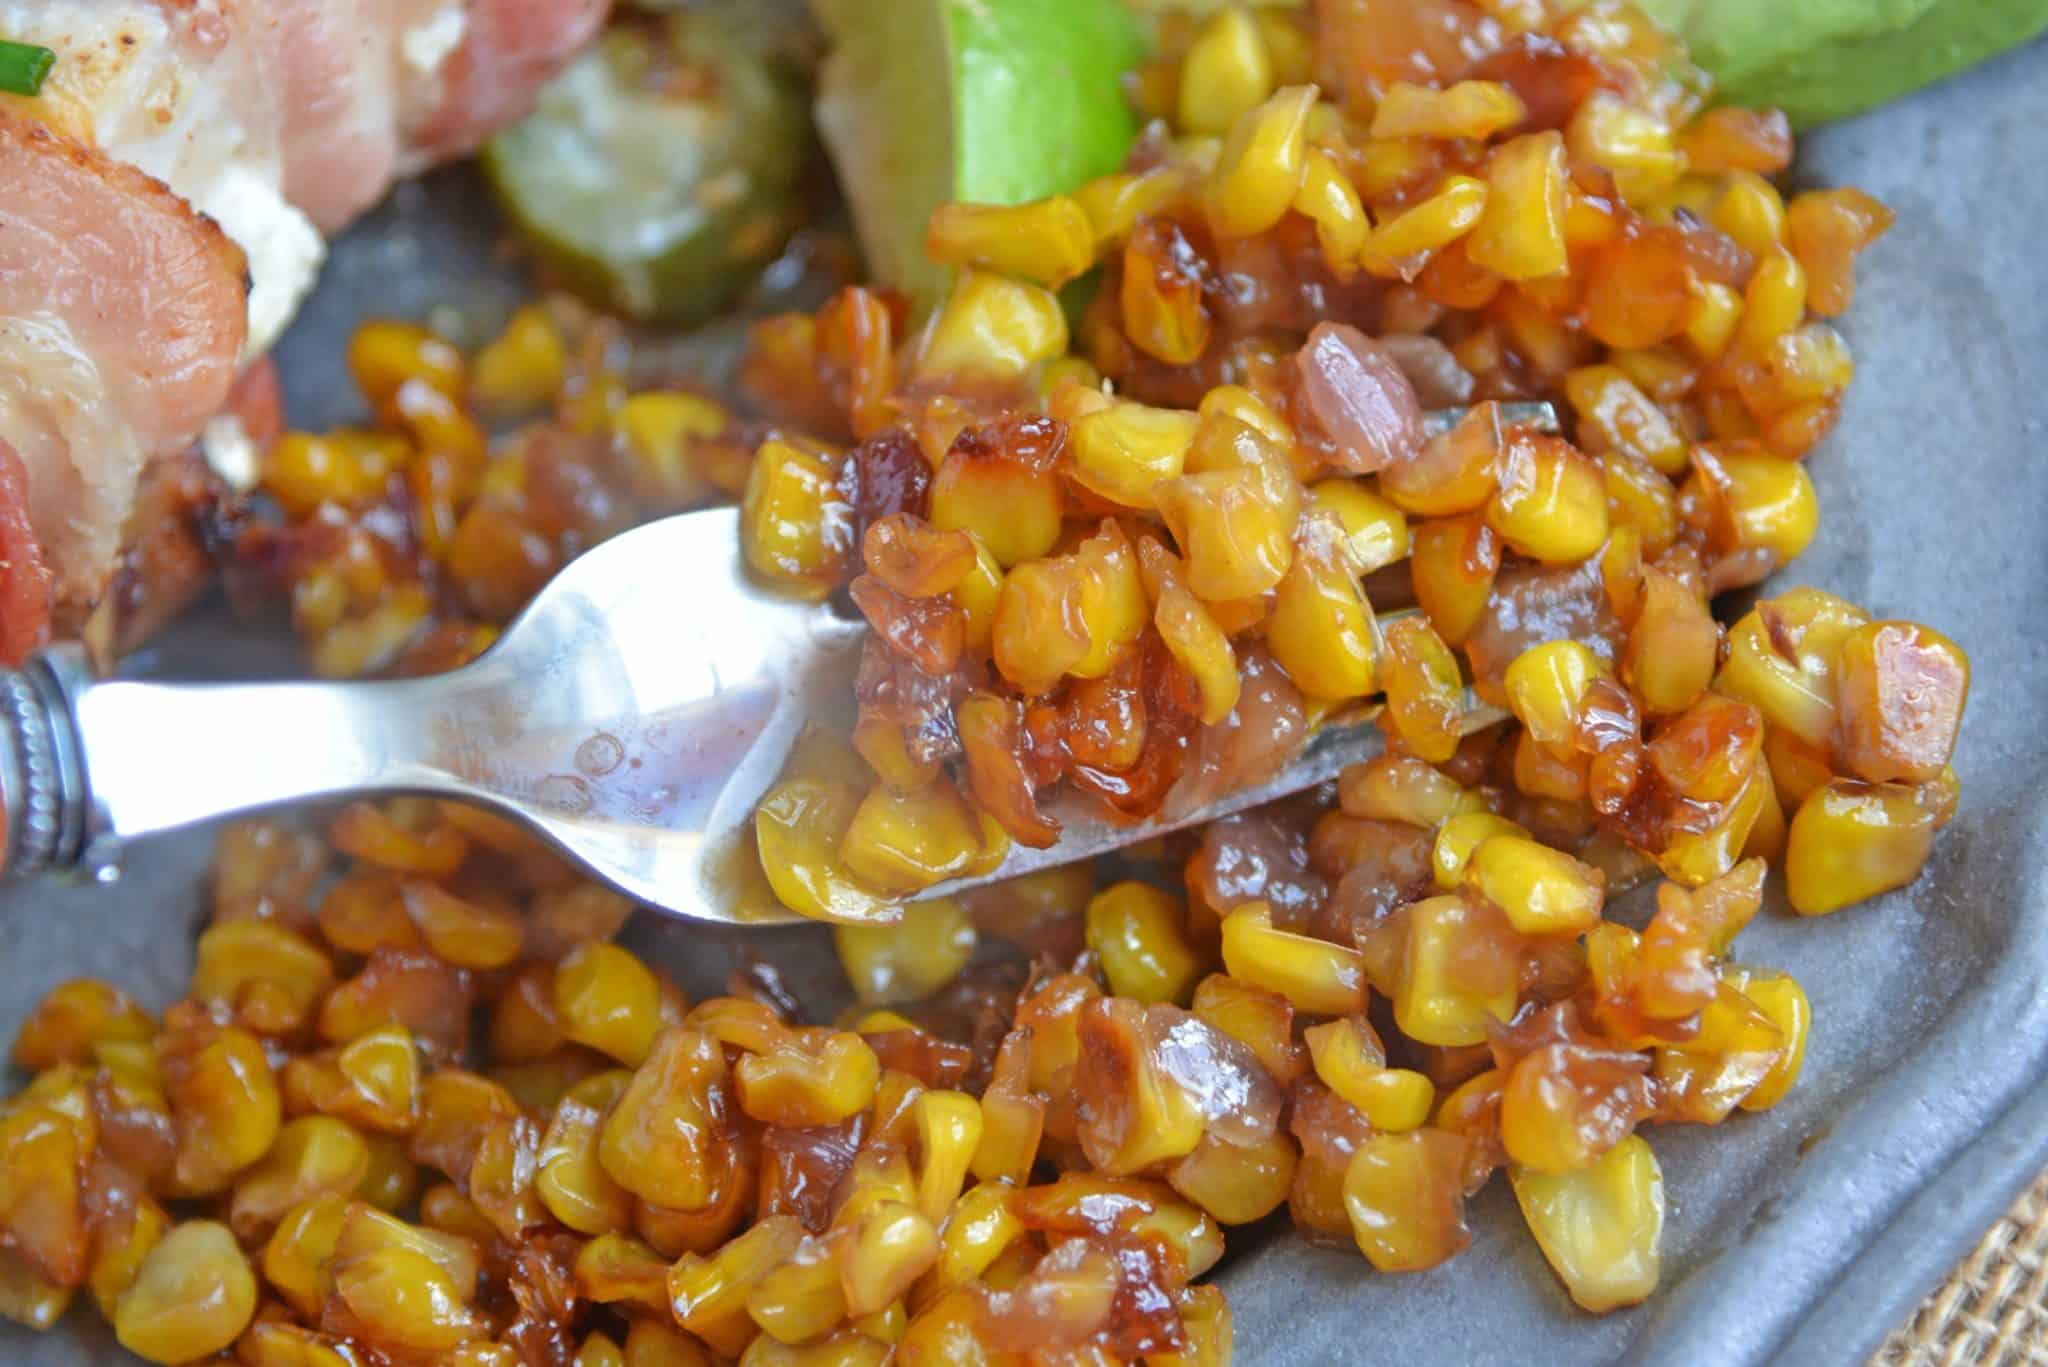 Southern Fried Corn is a simple southern recipe caramelizing corn and onions for a sweet side dish or taco filling! #friedcorn #cornrecipes #easysidedishes www.savoryexperiments.com 